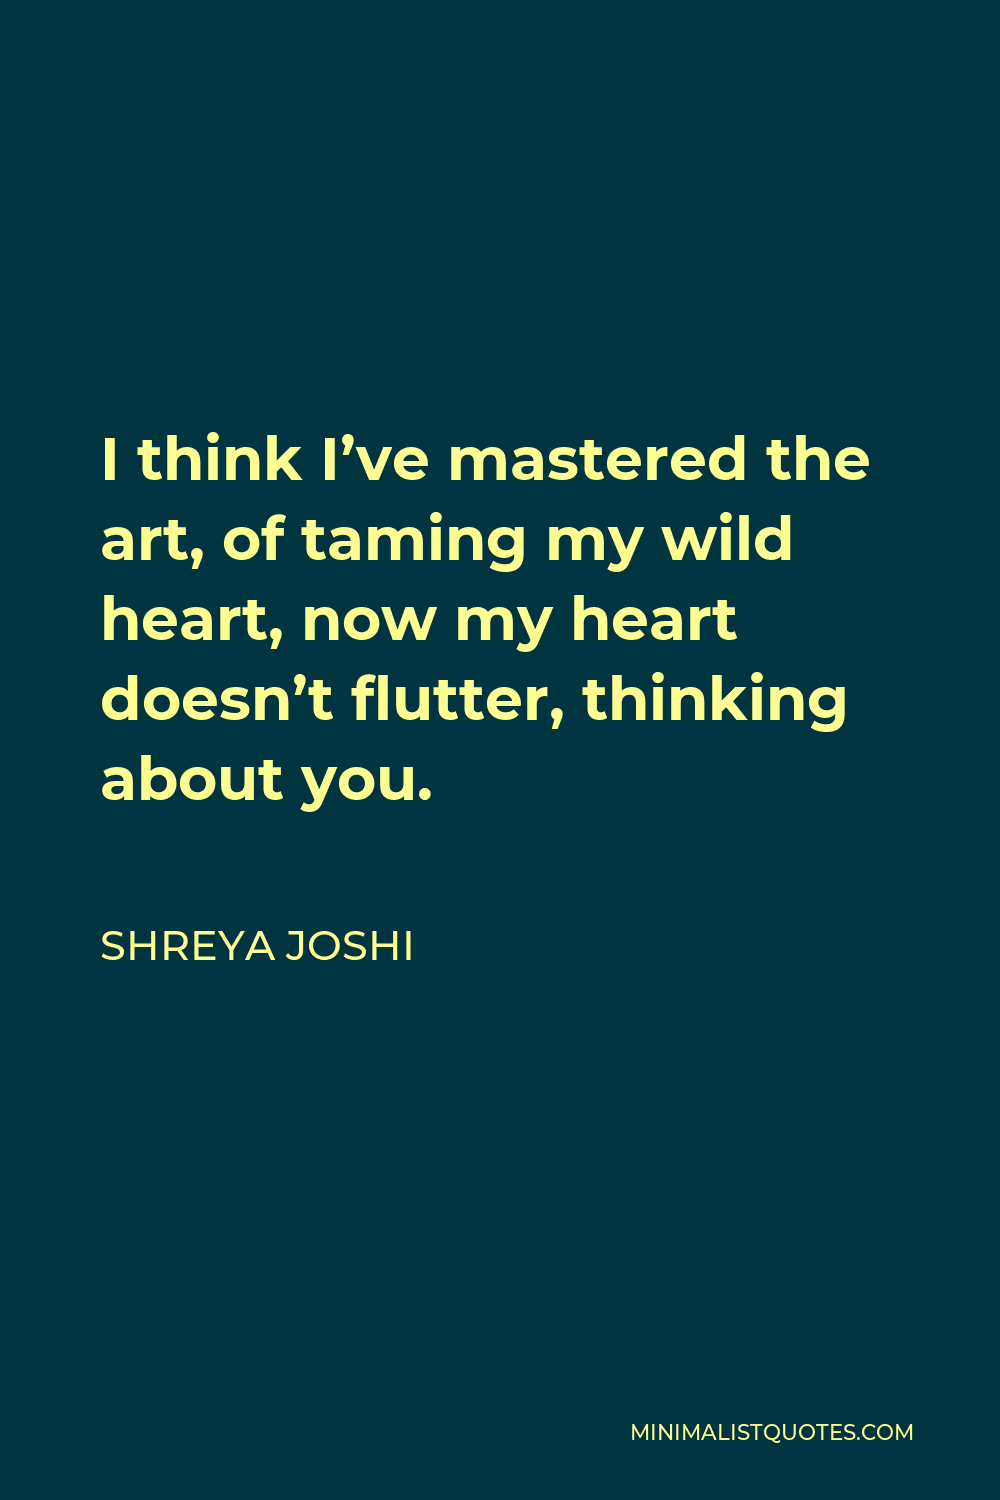 Shreya Joshi Quote - I think I’ve mastered the art, of taming my wild heart, now my heart doesn’t flutter, thinking about you.